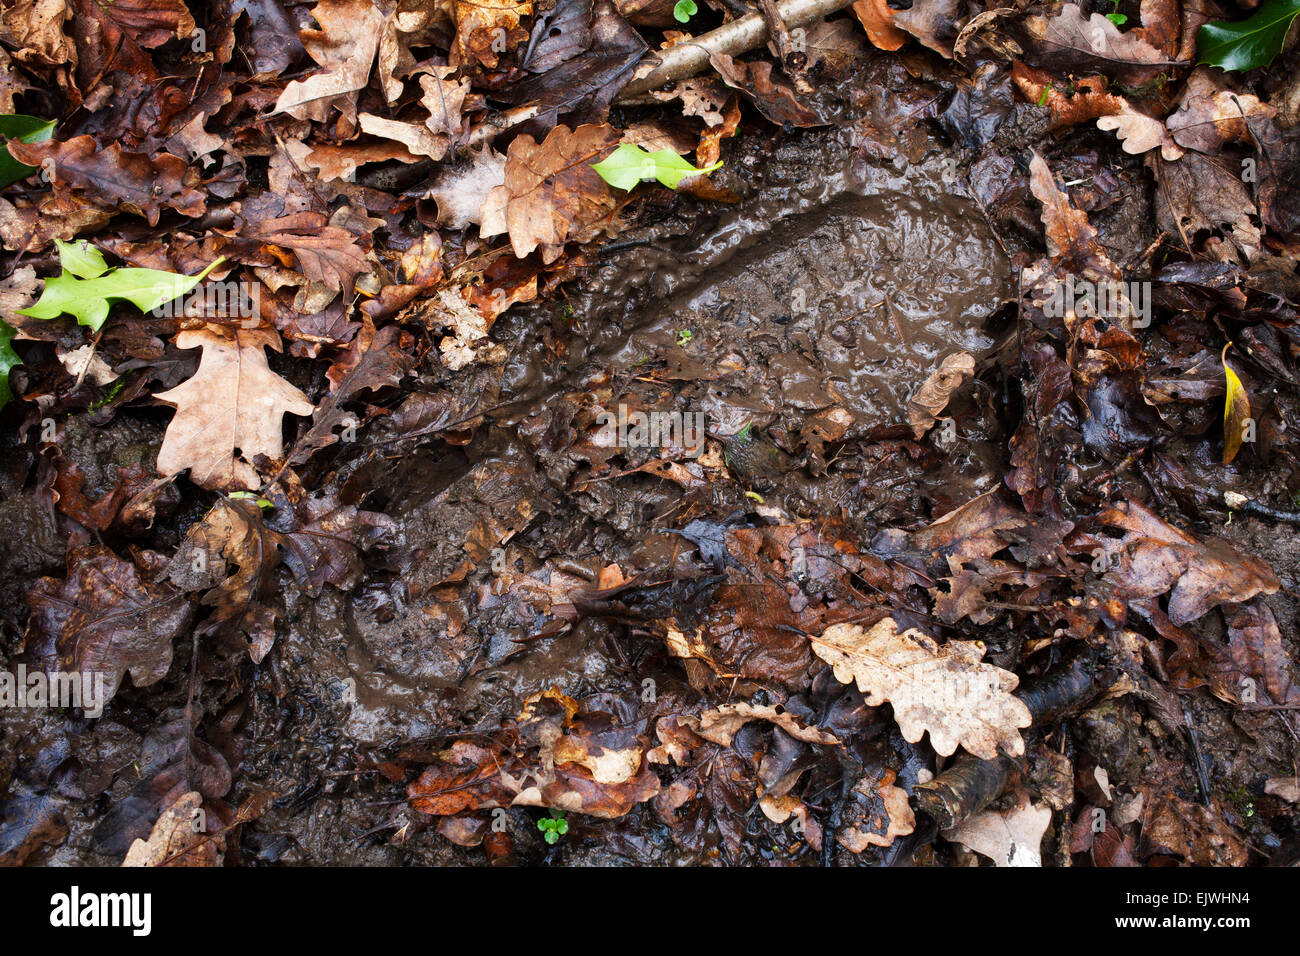 A muddy footprint in a forest. Stock Photo